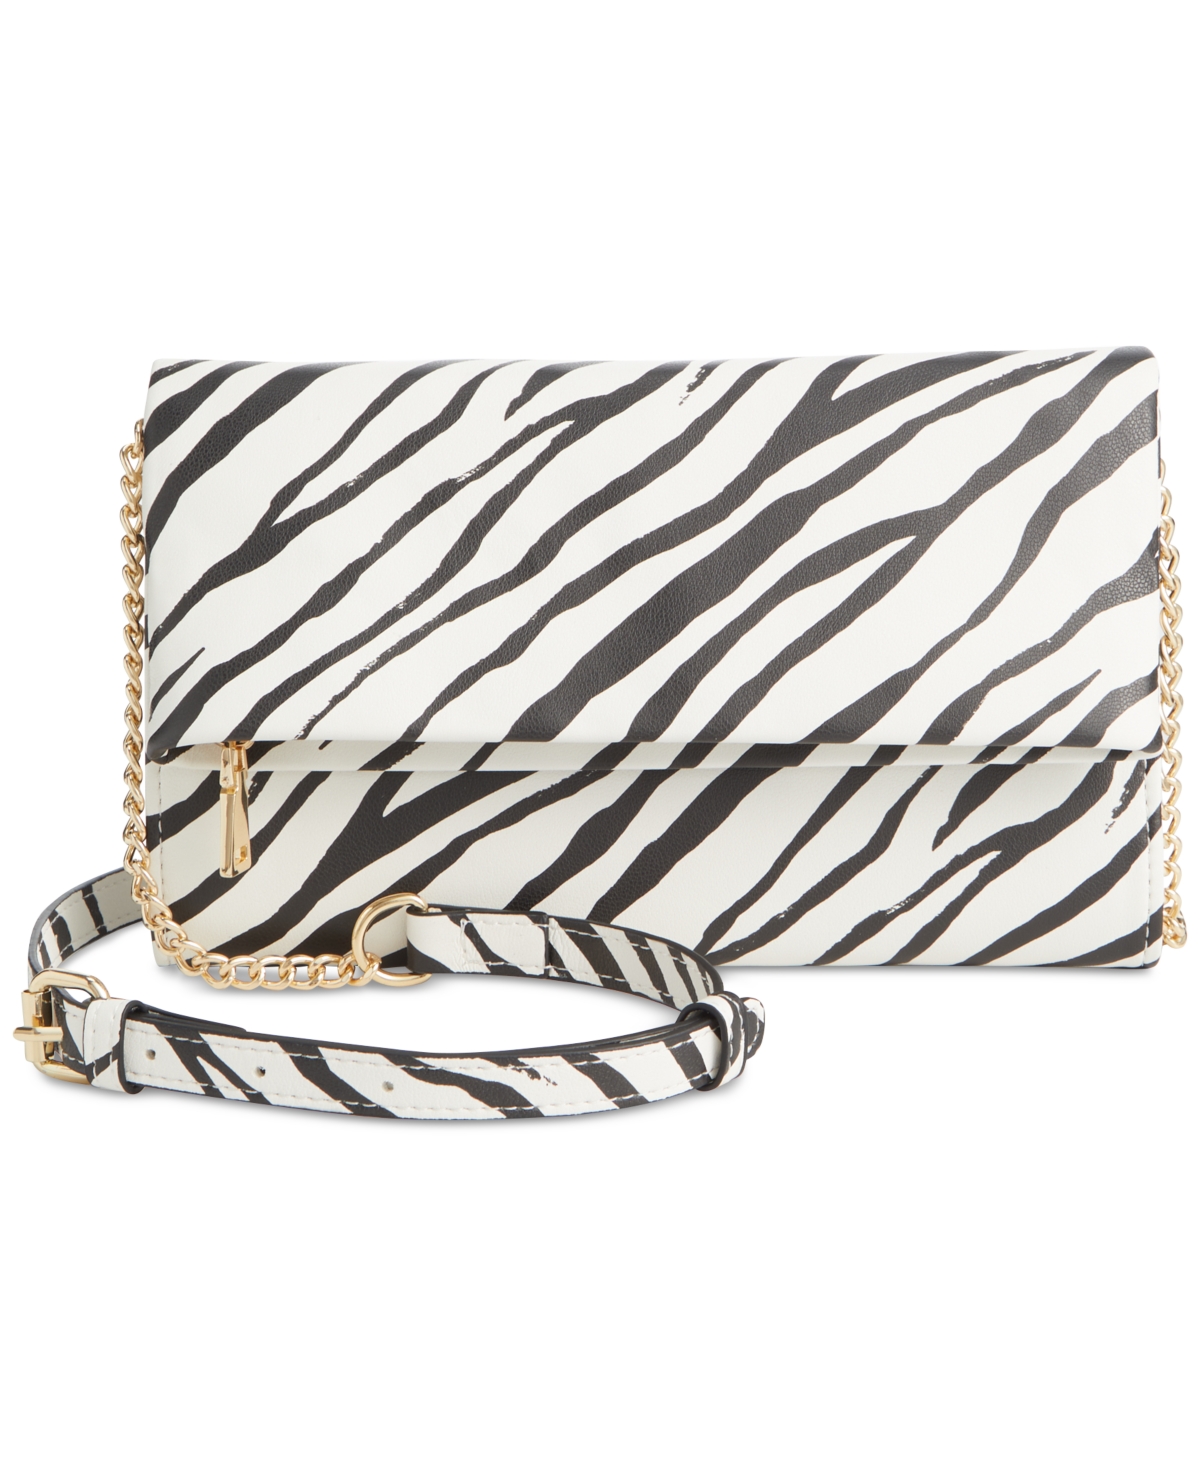 Averry Tunnel Convertible Clutch Crossbody, Created for Macy's - Bone/Gold